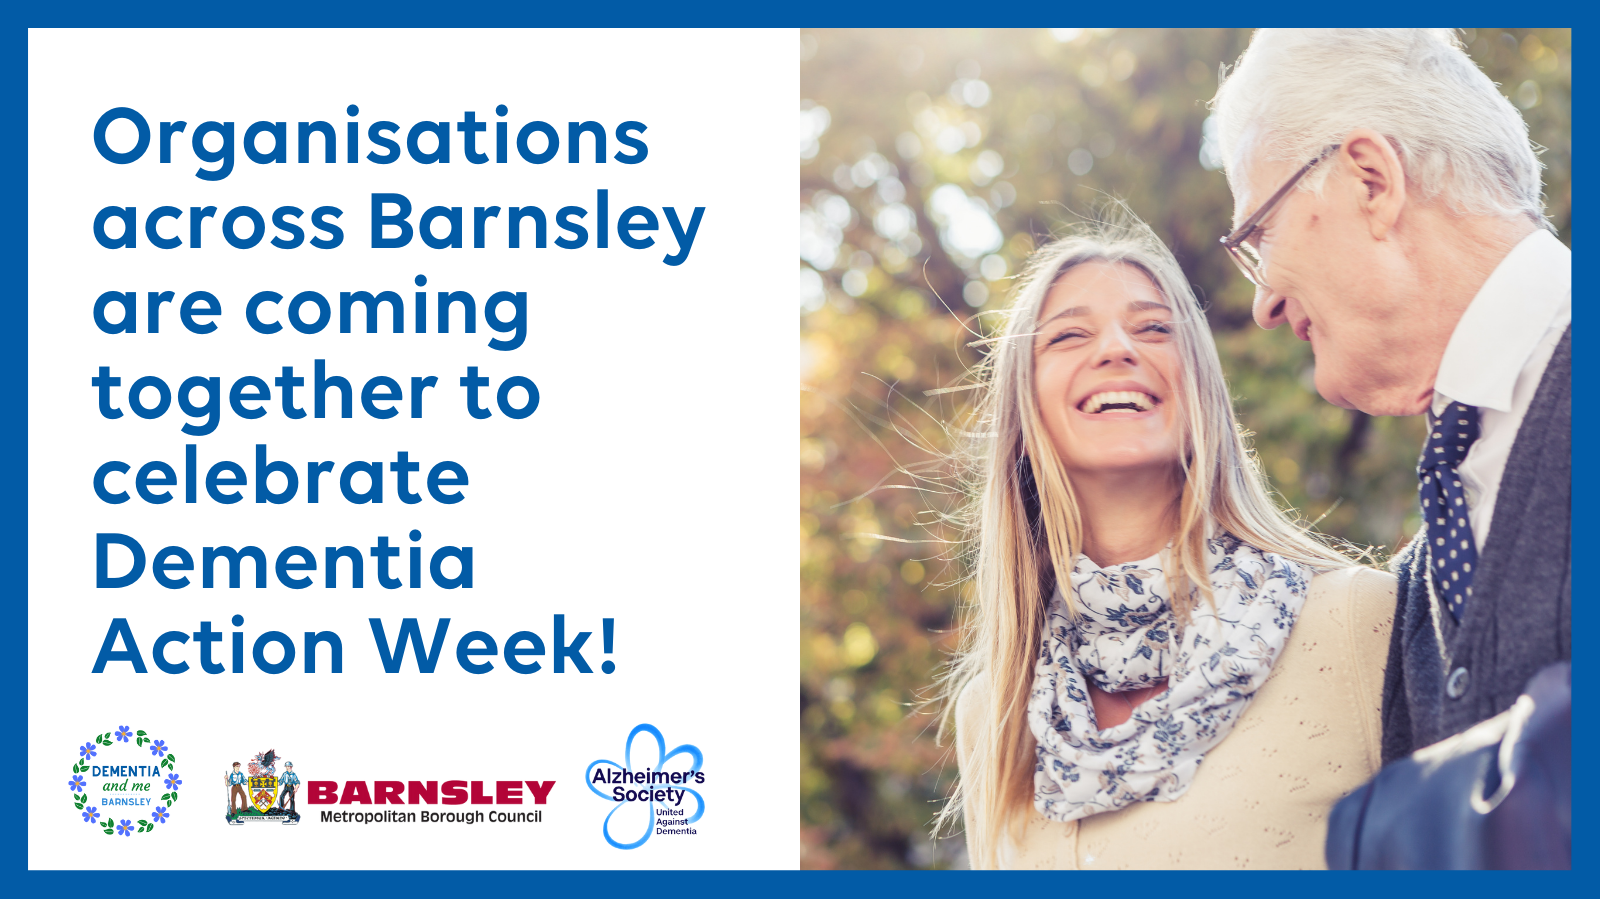 Organisations across Barnsley are coming together to celebrate Dementia Action Week!